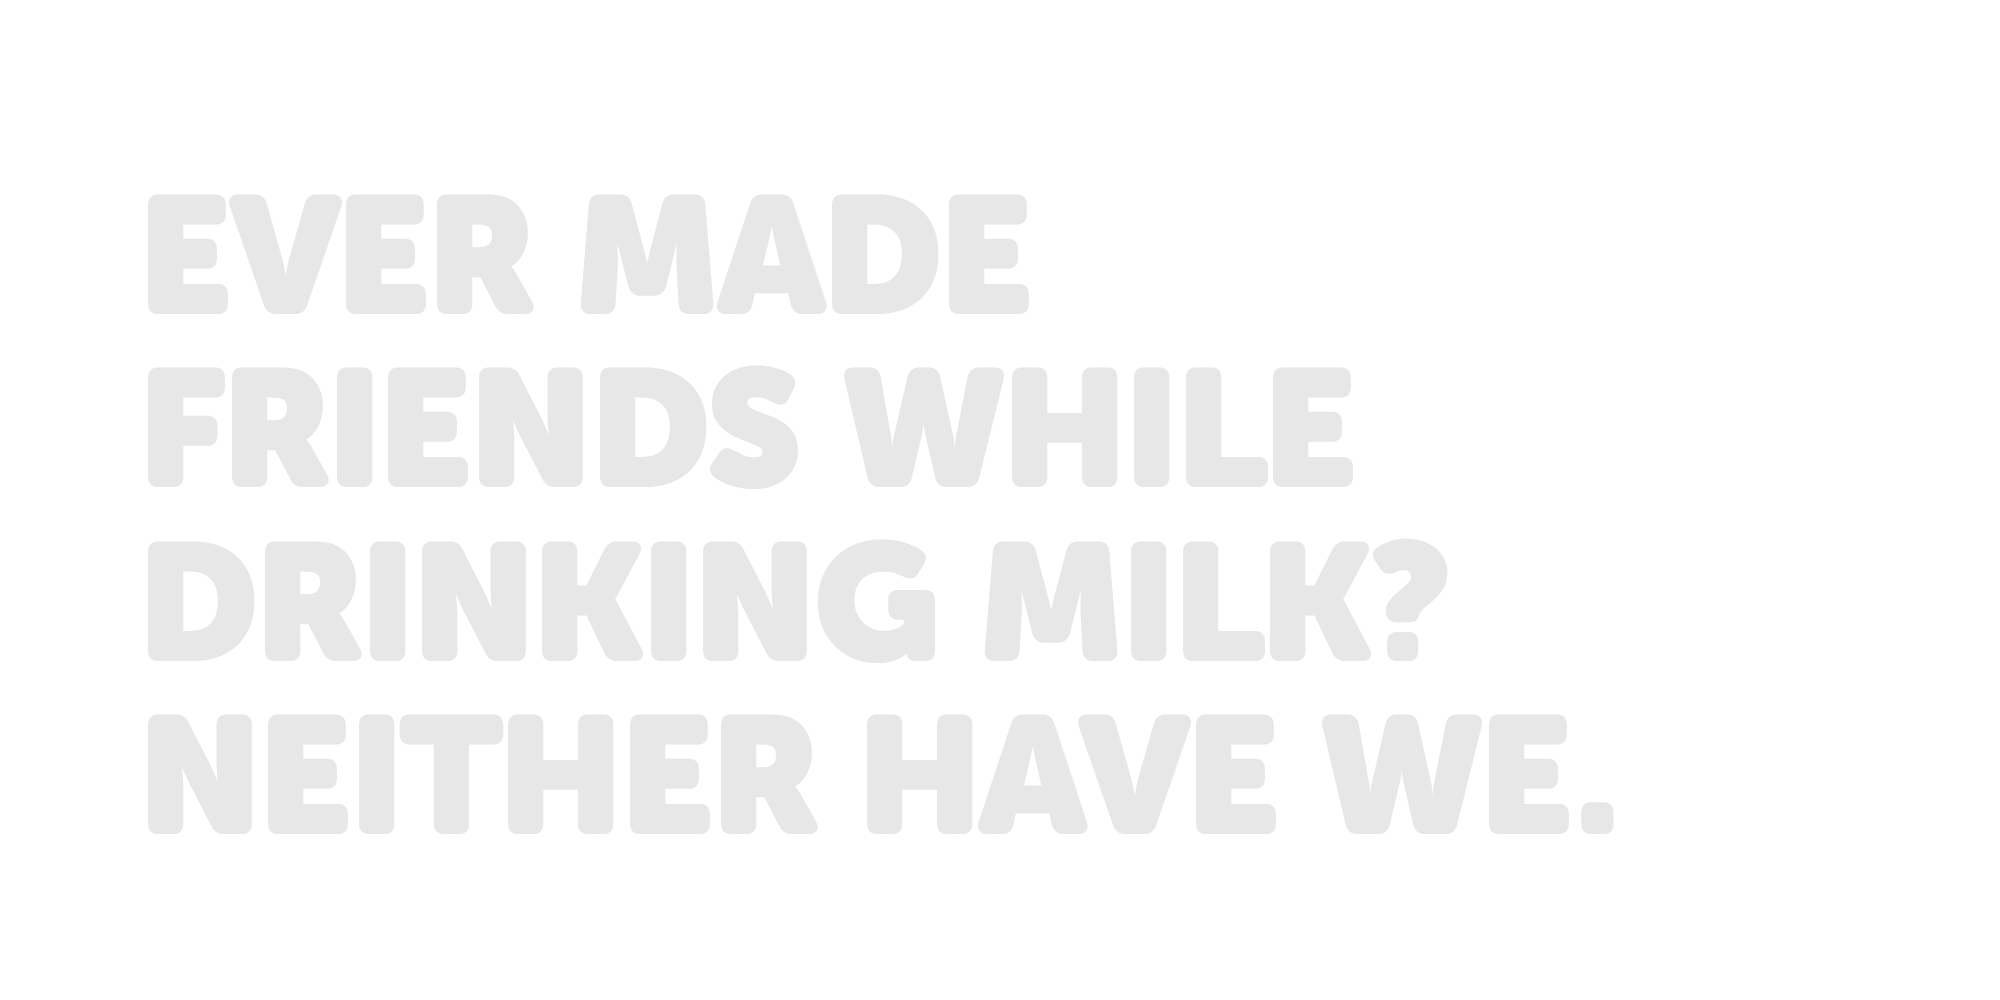 Ever made friends while drinking milk? Neither have we.